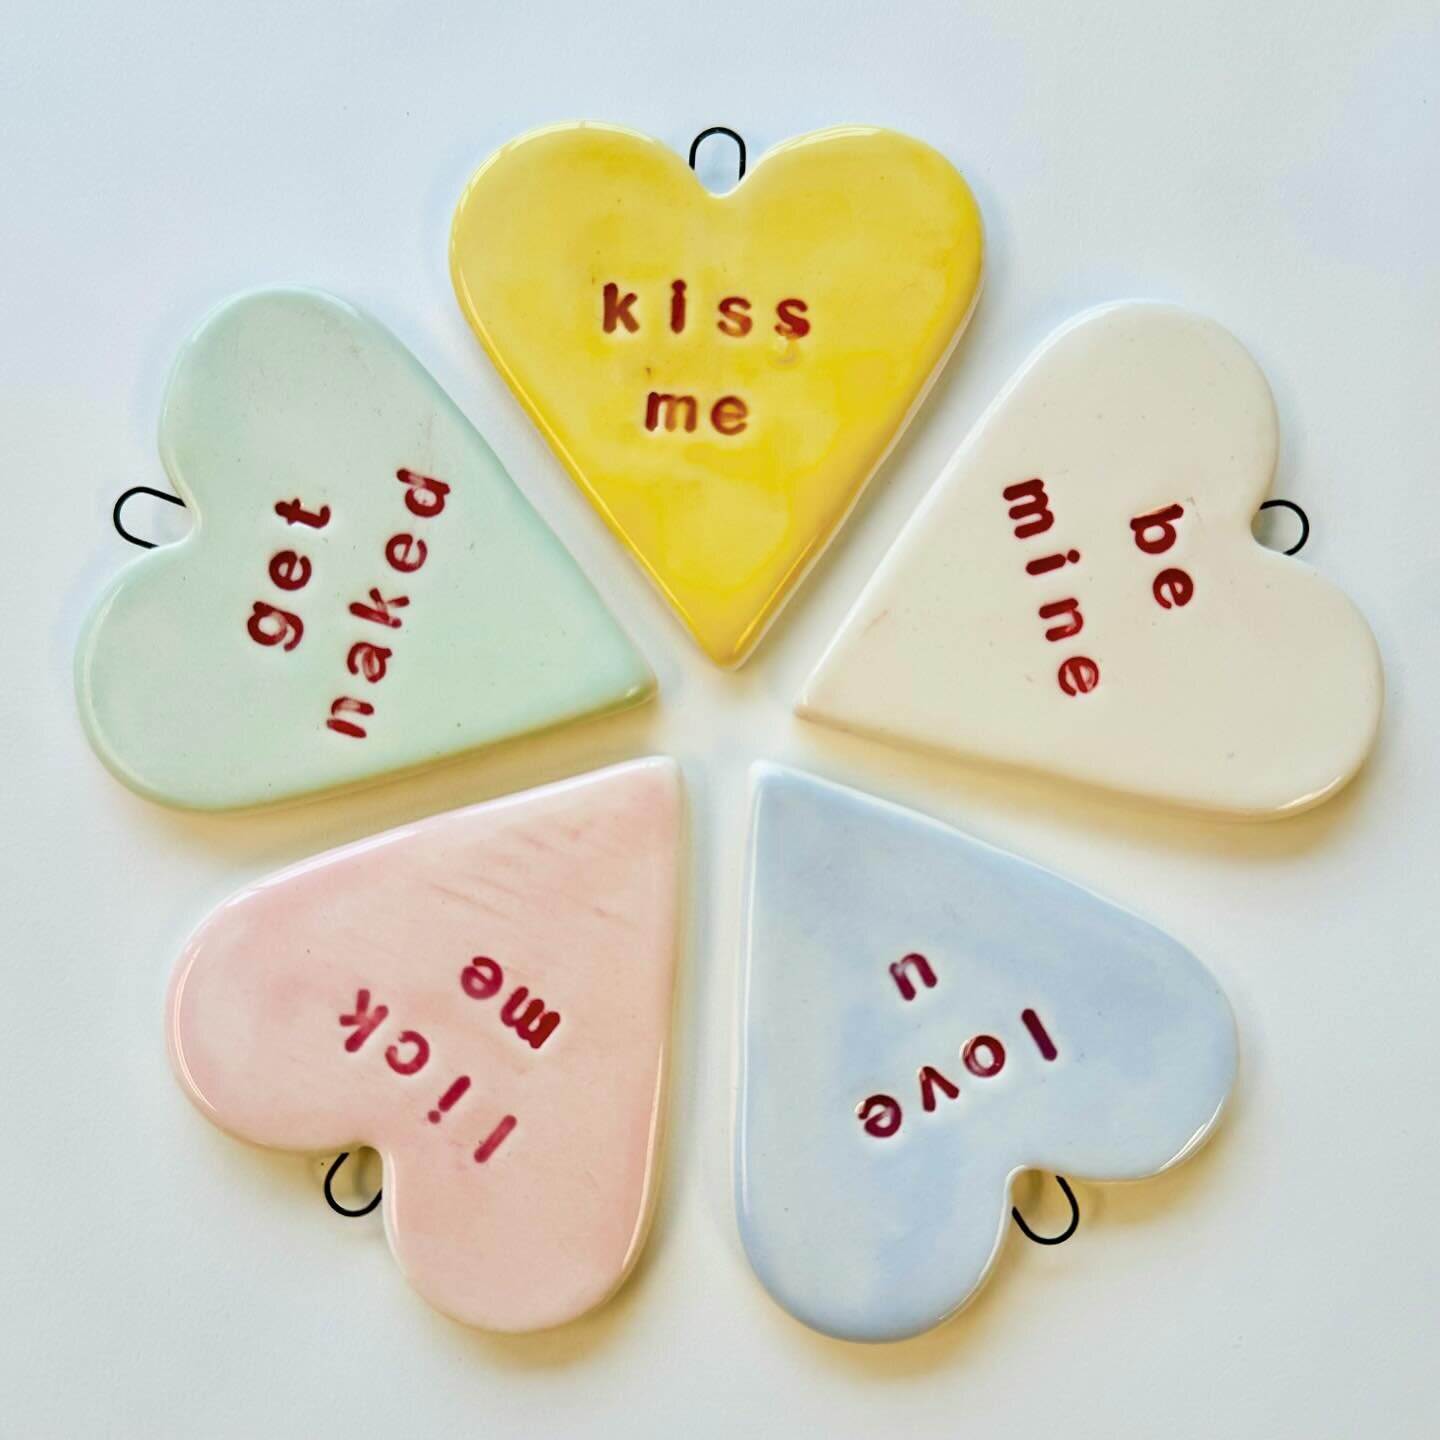 Super excited to finally get some V-day stuff down to Crompton Collective tomorrow! These conversation heart ornaments will be there along with a few slightly more scandalous ones&hellip; #shopcrompton